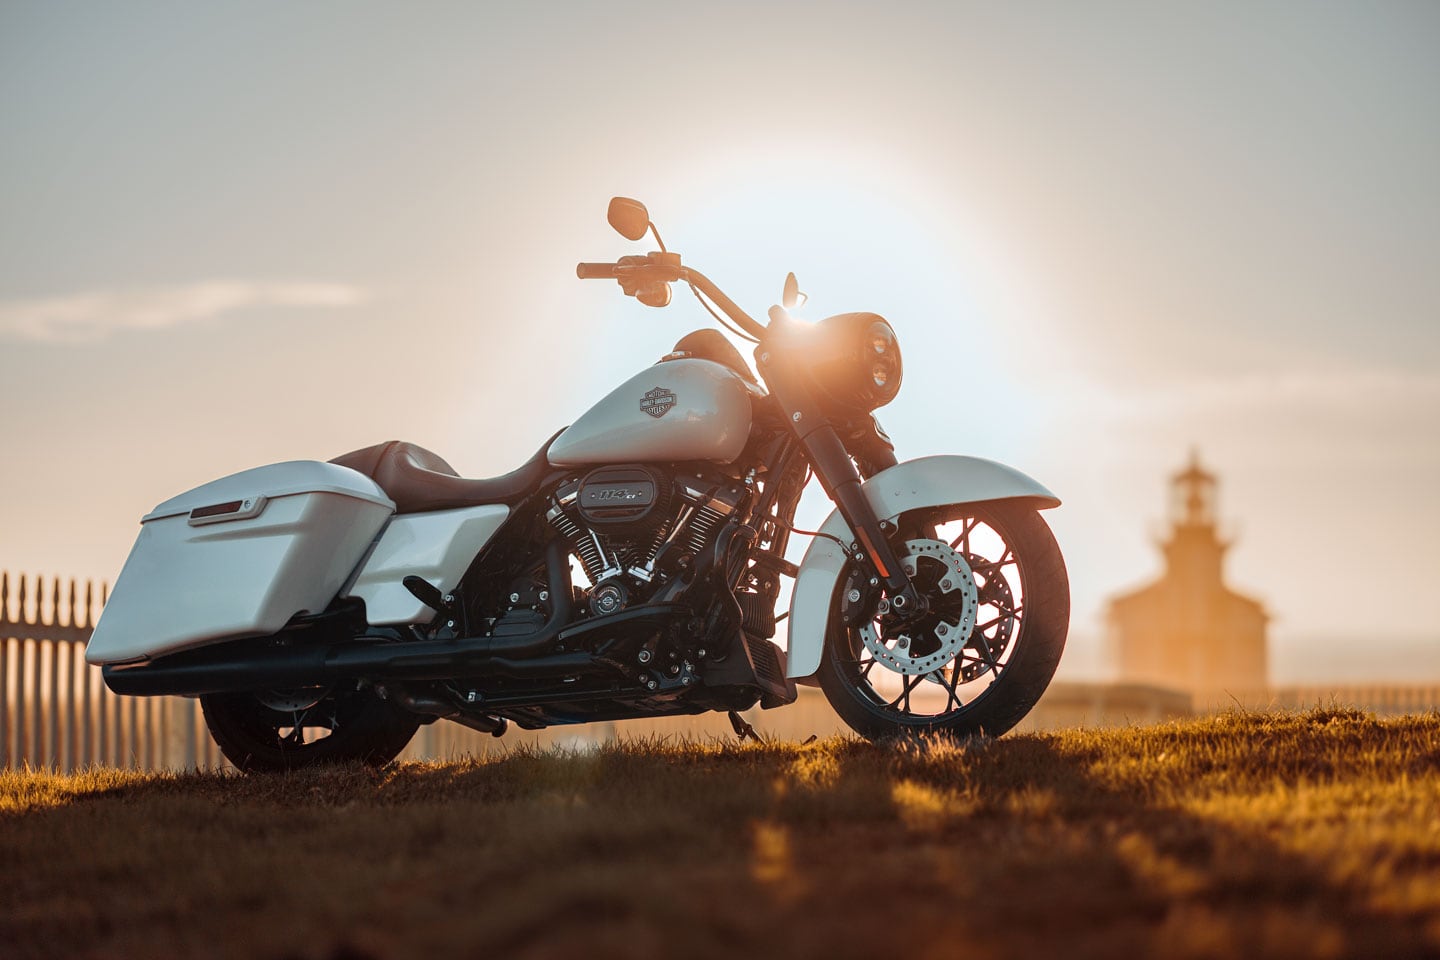 The Road King Special’s elemental styling is a departure from the original Road King, which more closely resembles the Heritage Classic in the current H-D lineup.